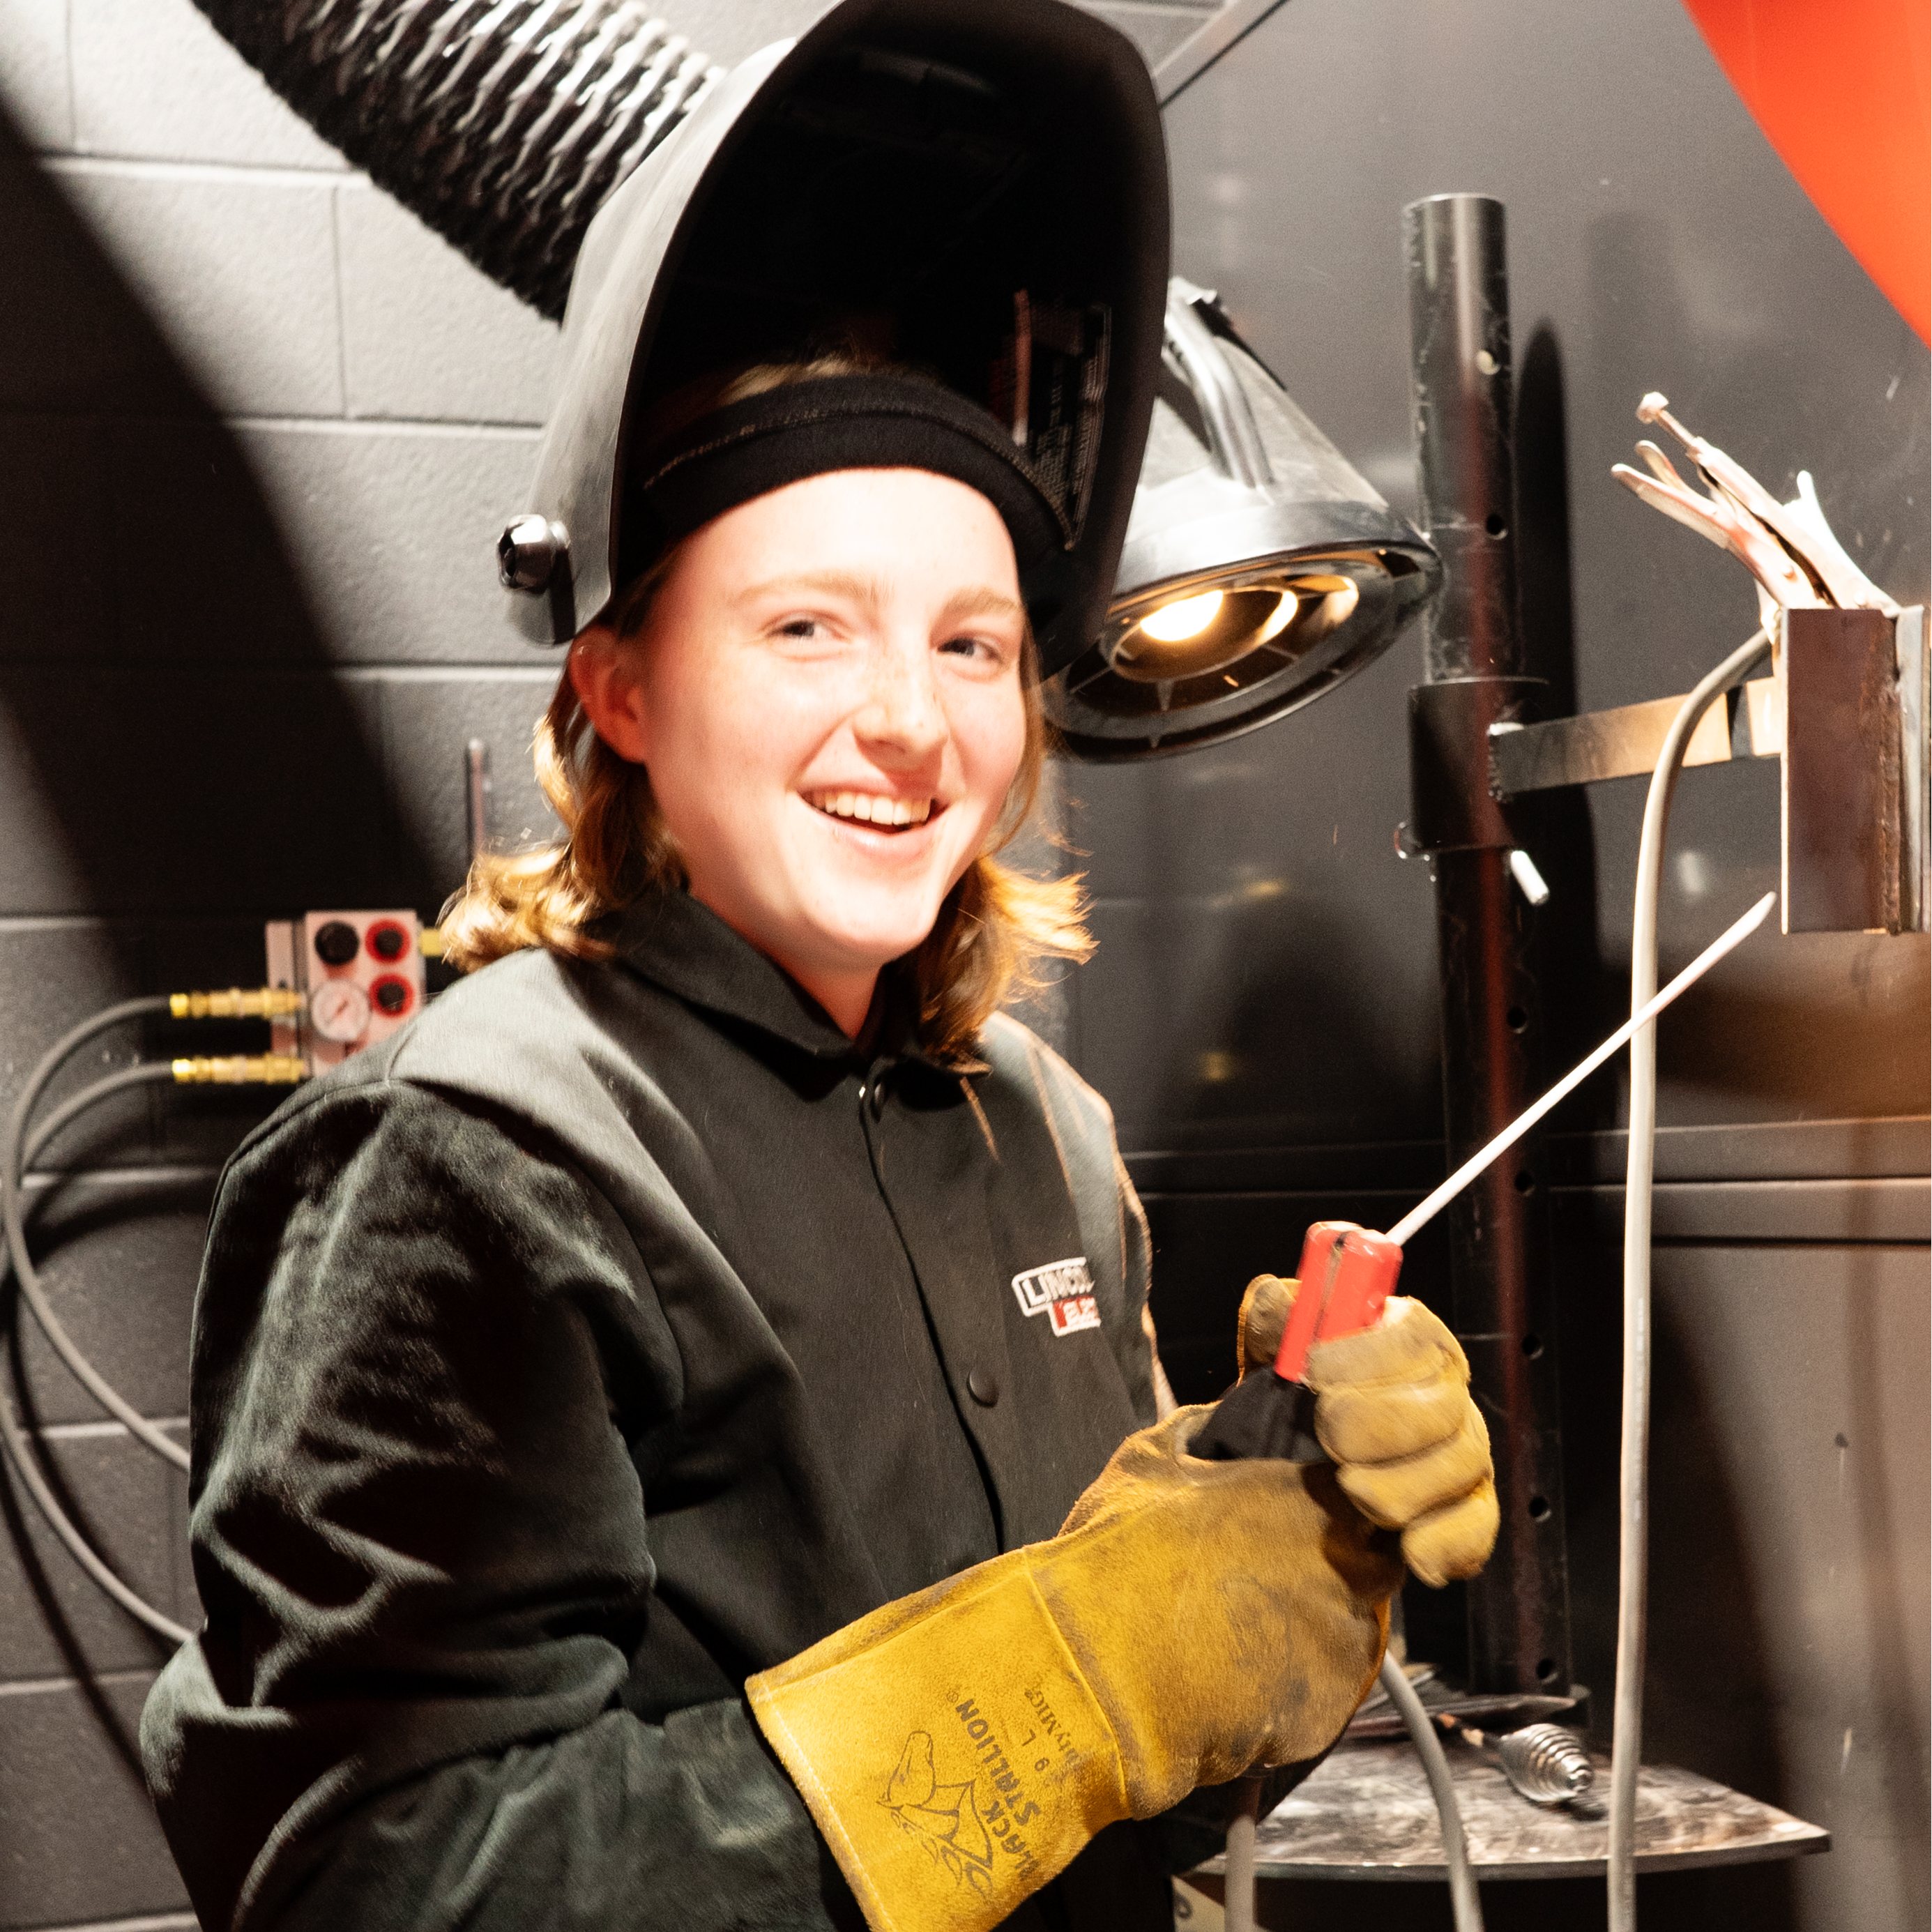 A White, female student prepares to begin welding in her booth.